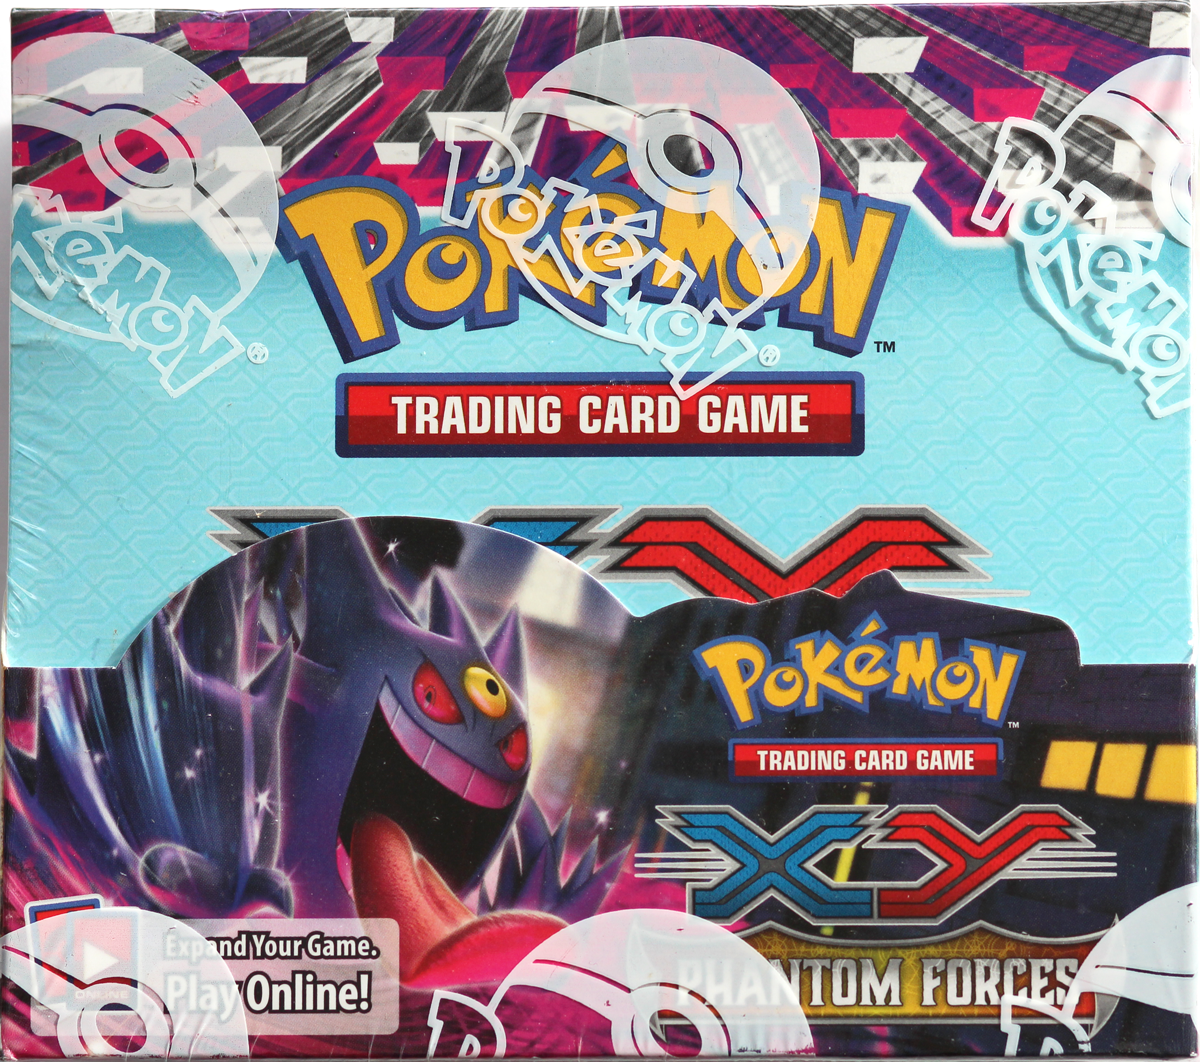 Pokemon TCG: XY expansion Phantom Forces out now